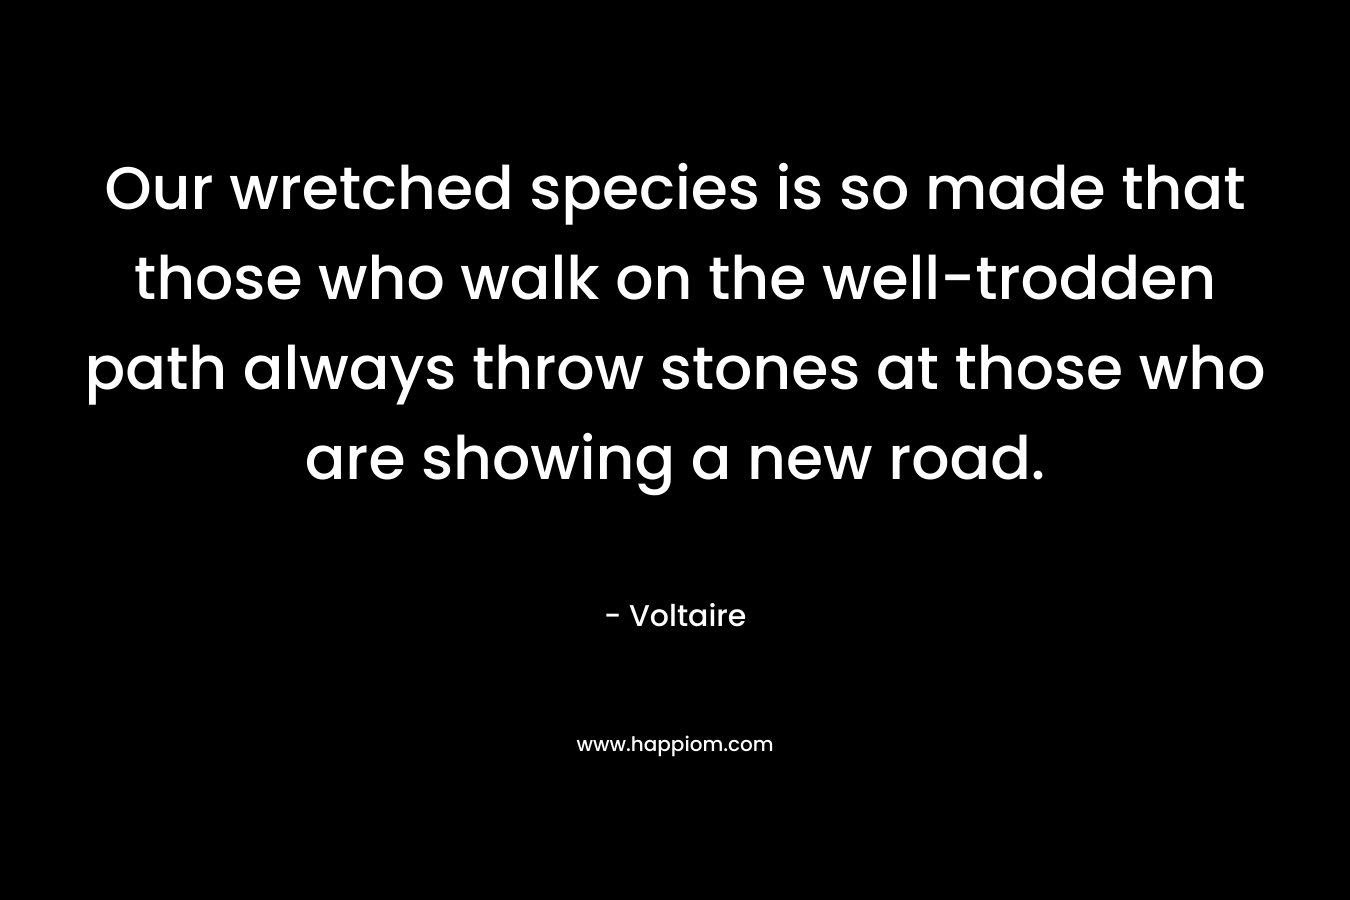 Our wretched species is so made that those who walk on the well-trodden path always throw stones at those who are showing a new road. – Voltaire